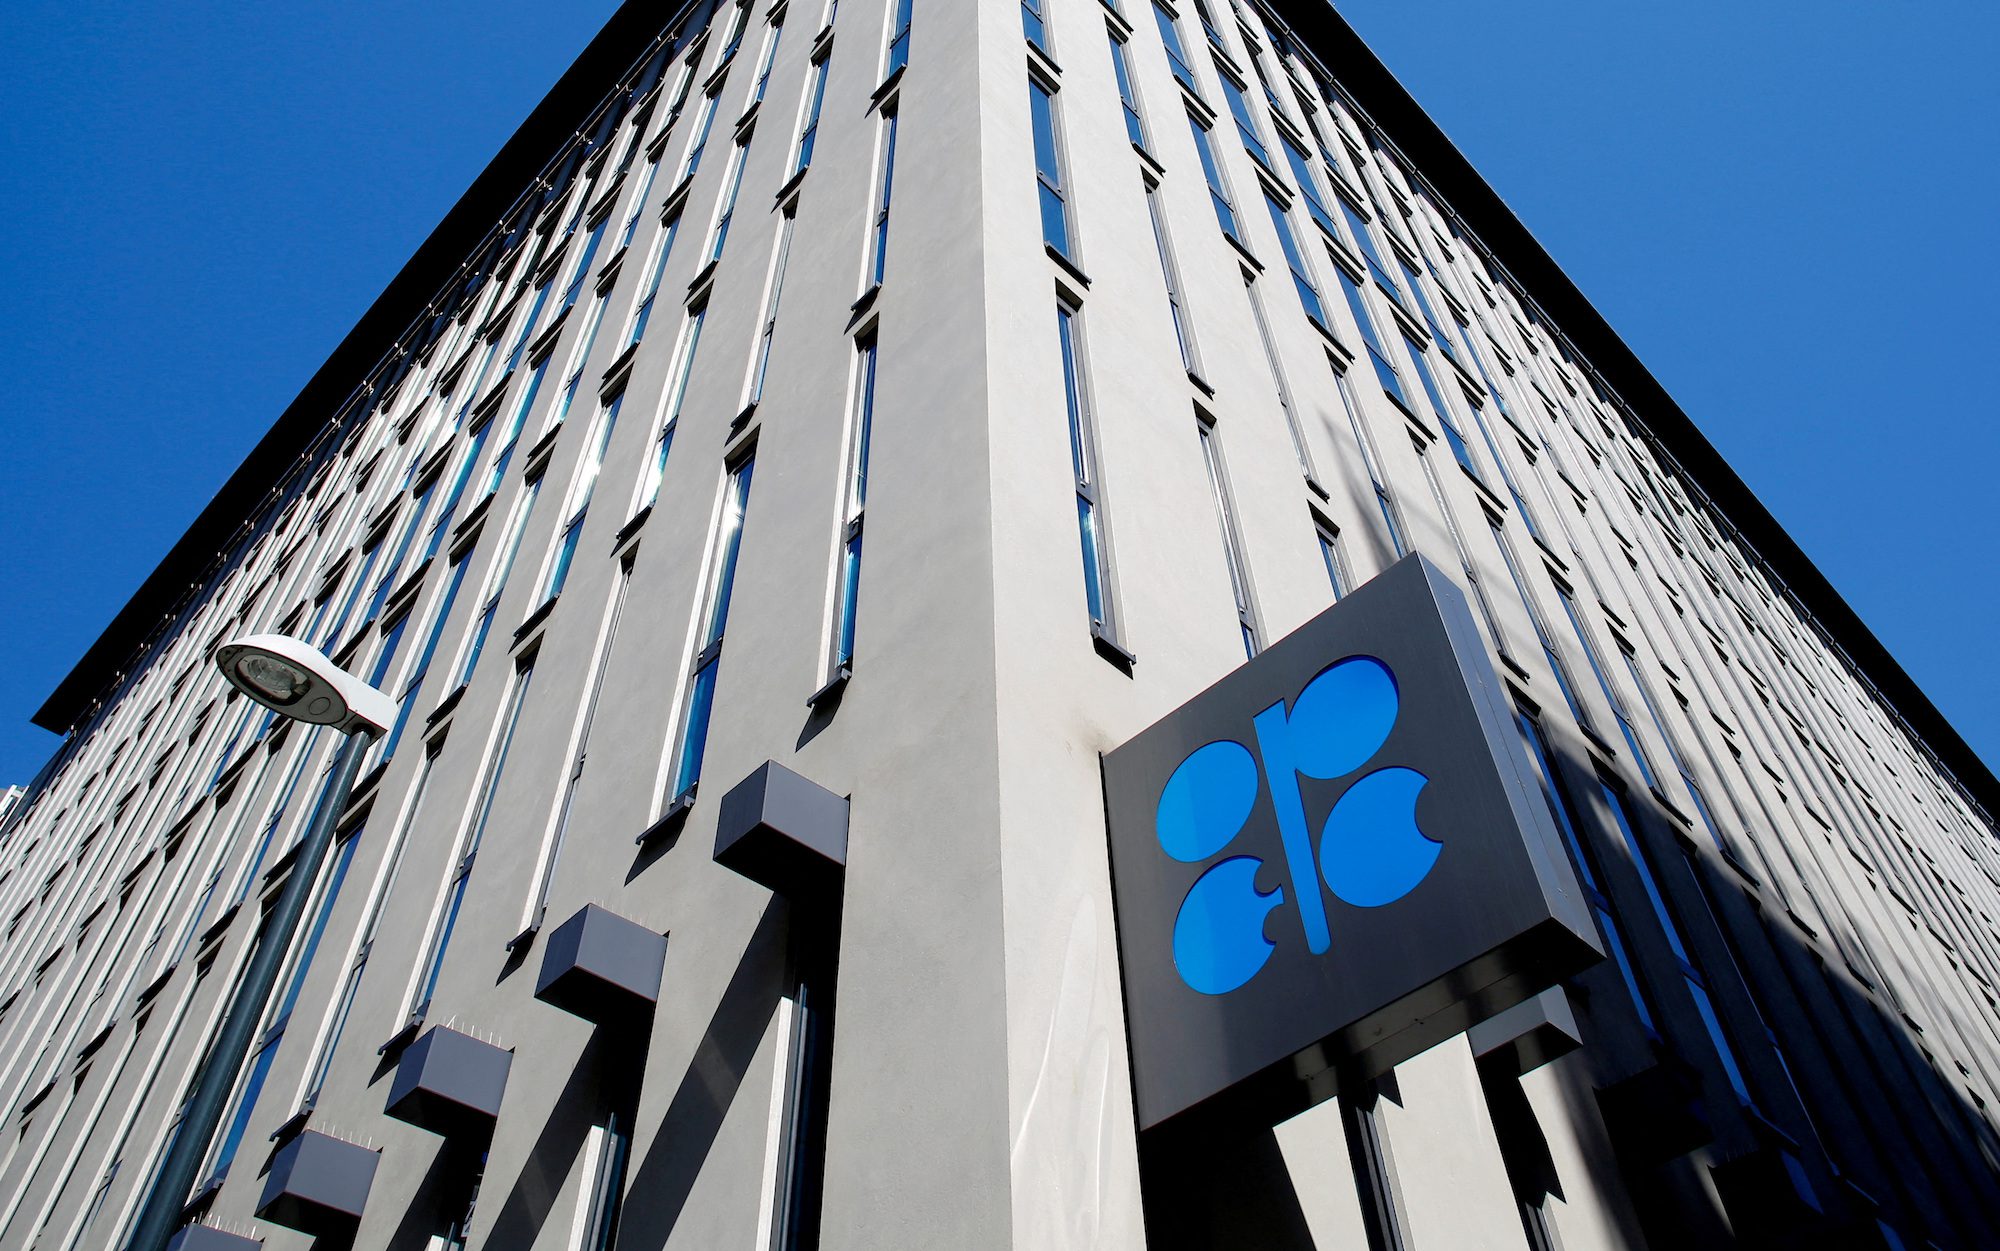 FILE PHOTO: The logo of the Organization of the Petroleoum Exporting Countries (OPEC) is seen outside of OPEC's headquarters in Vienna, Austria April 9, 2020. REUTERS